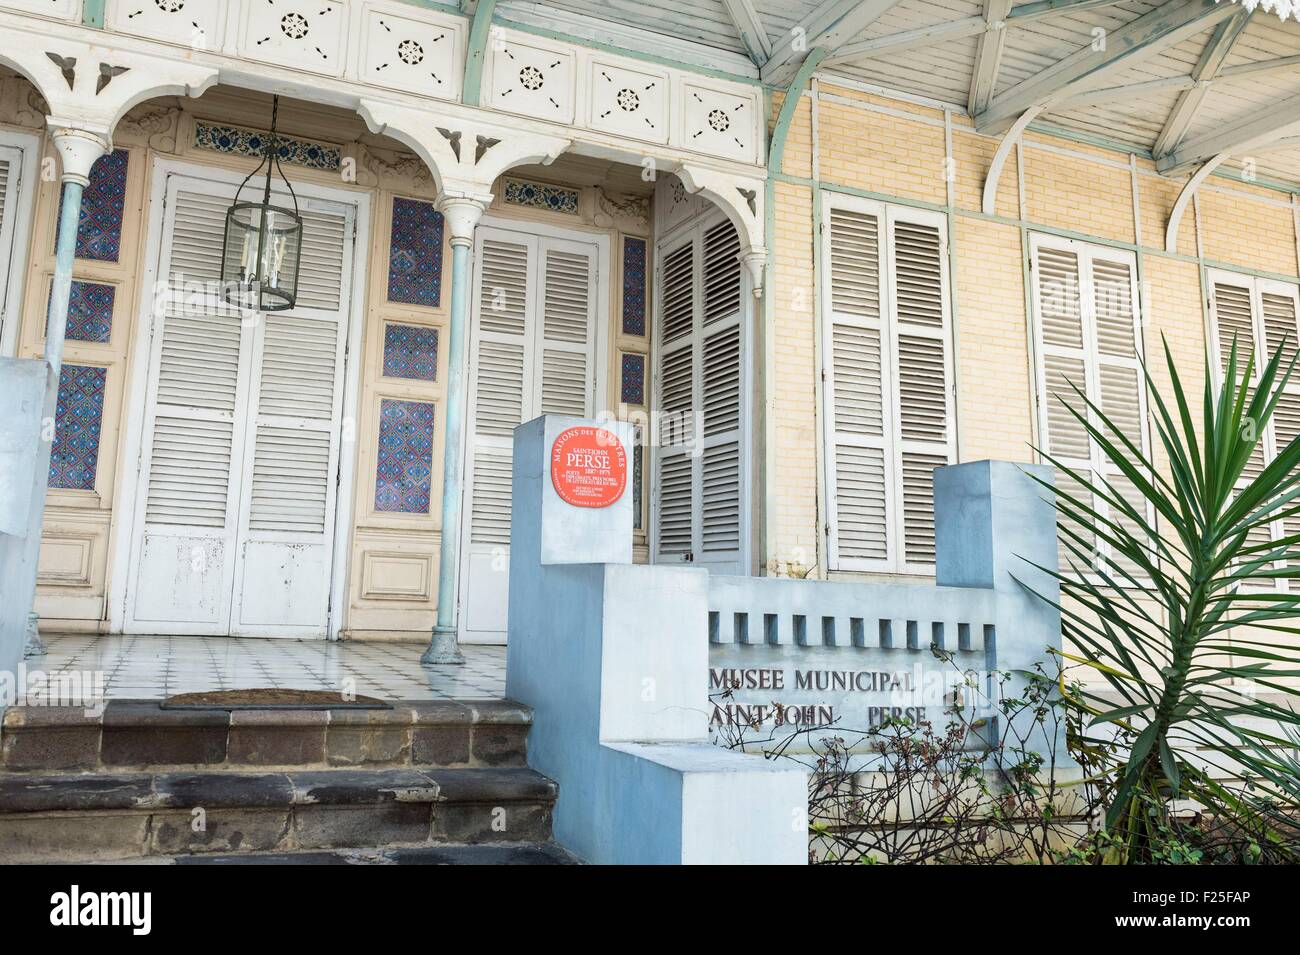 France, Guadeloupe (French West Indies), Grande Terre, Pointe a Pitre, Saint John Perse Municipal Museum in the historical district houses a permanent exhibition of Creole costumes and Saint John Perse's life Stock Photo